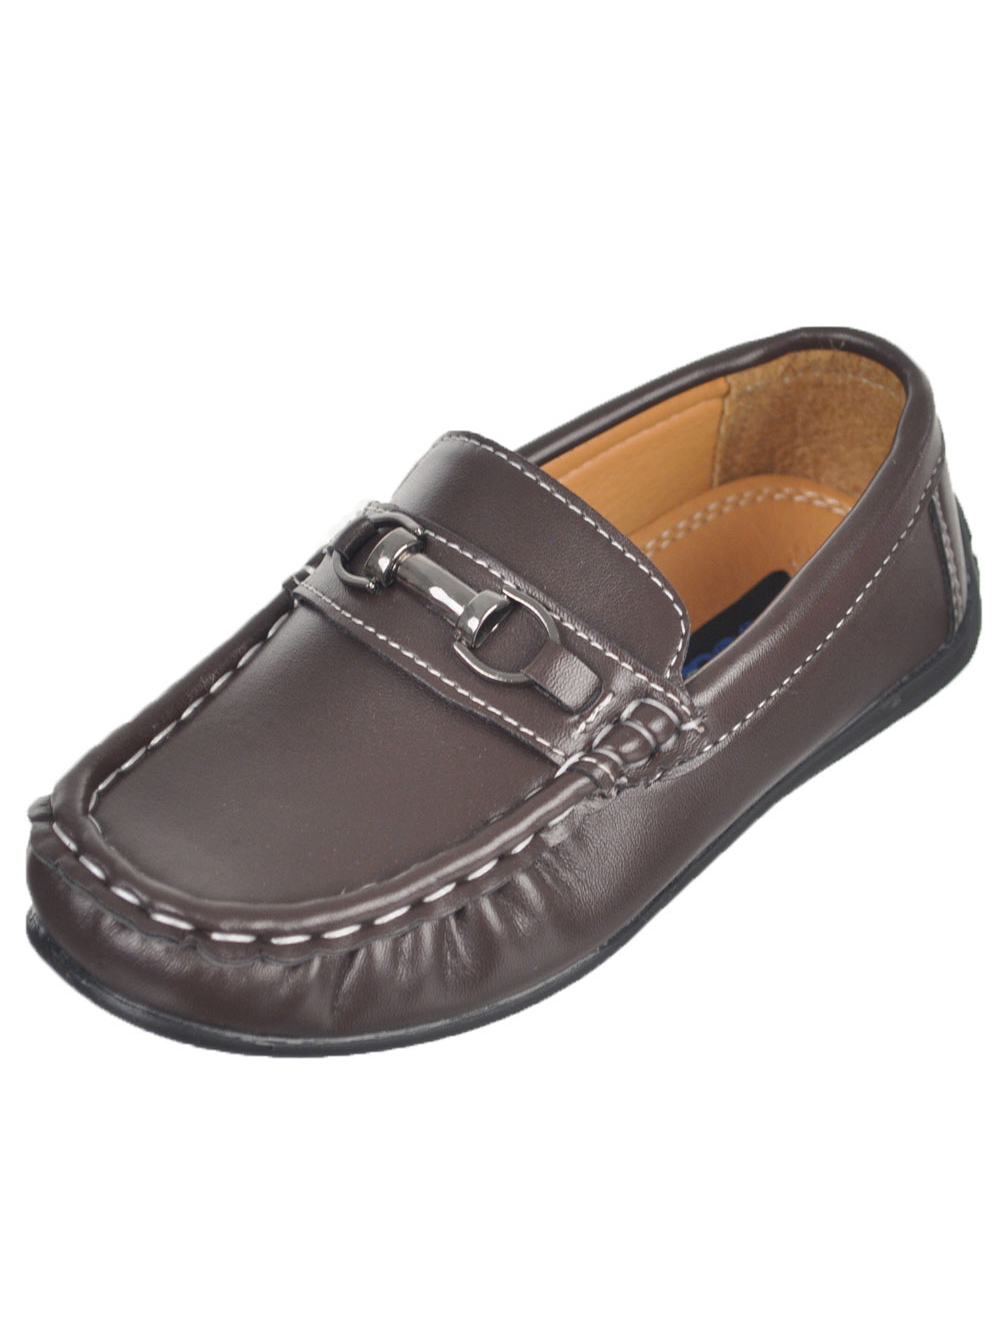 Toddler Sizes 5-12 Josmo Boys' "Clutch" Driving Loafers 